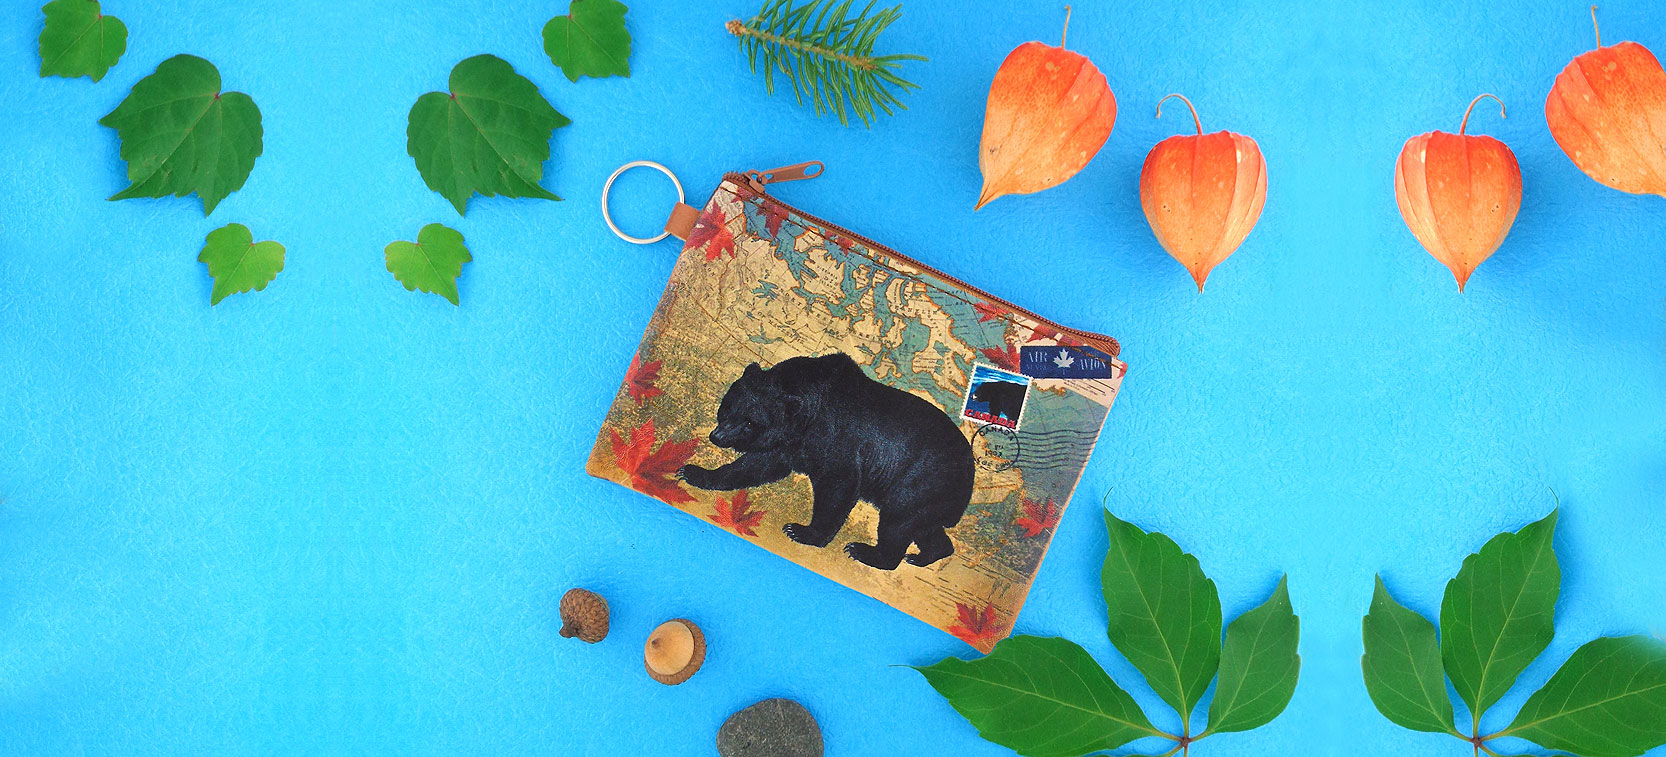 LAVISHY design and wholesale bear themed vegan accessories and gfits to gift shops, boutiques and book shops, souvenir stores in Canada, USA and worldwide.